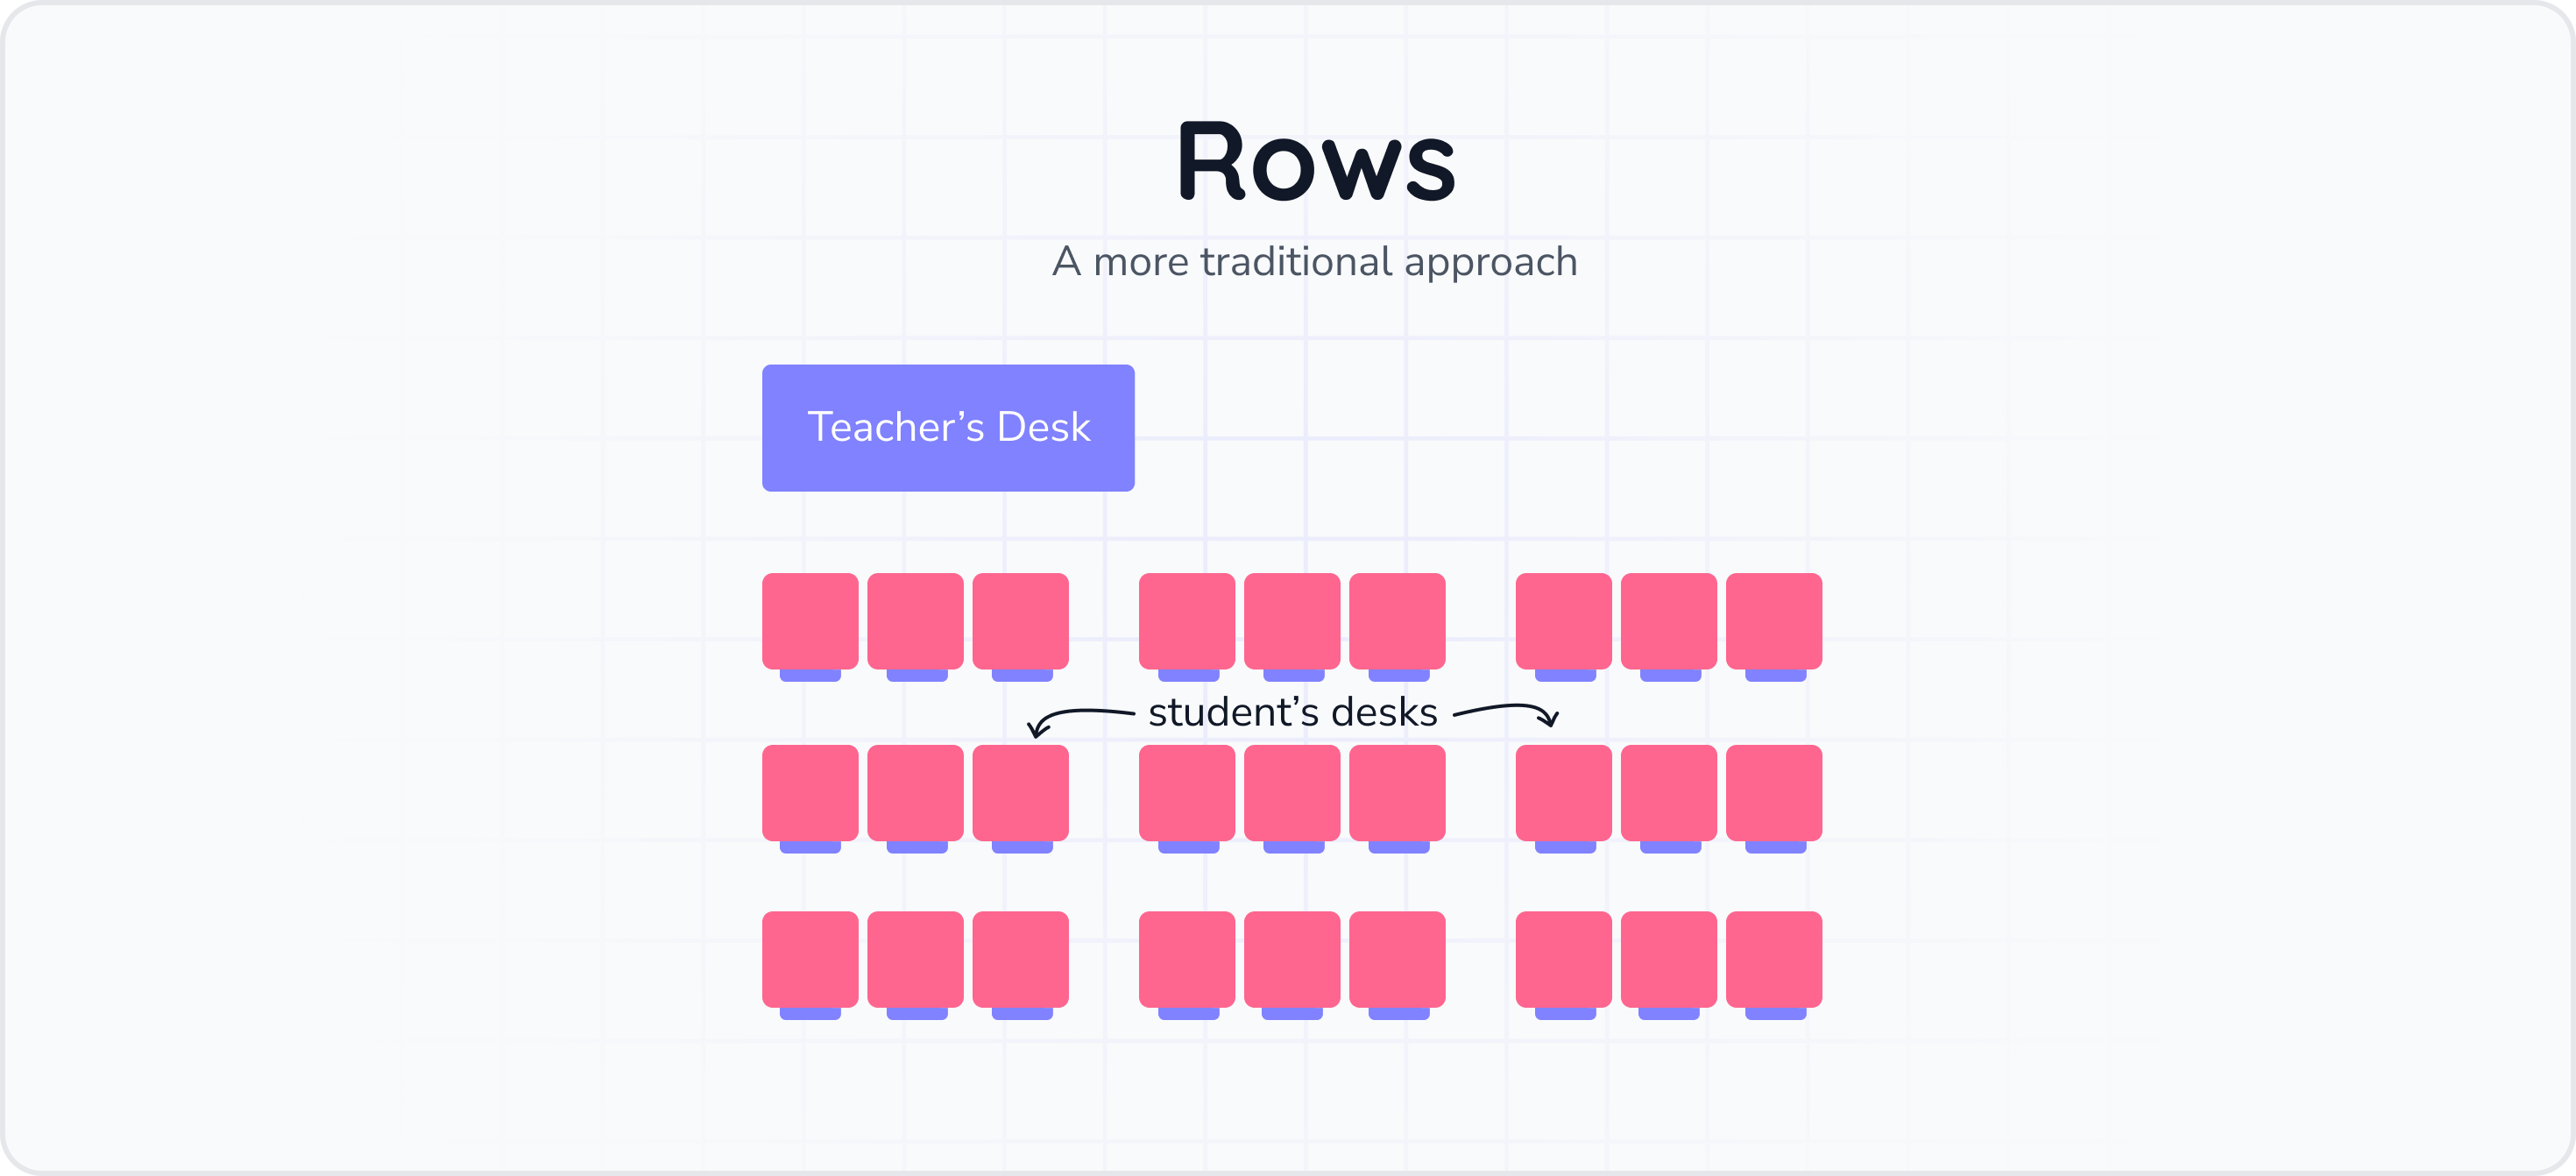 This image shows the layout of a seating plan consisting of rows, including where the student's desks are located in relation to the teacher.